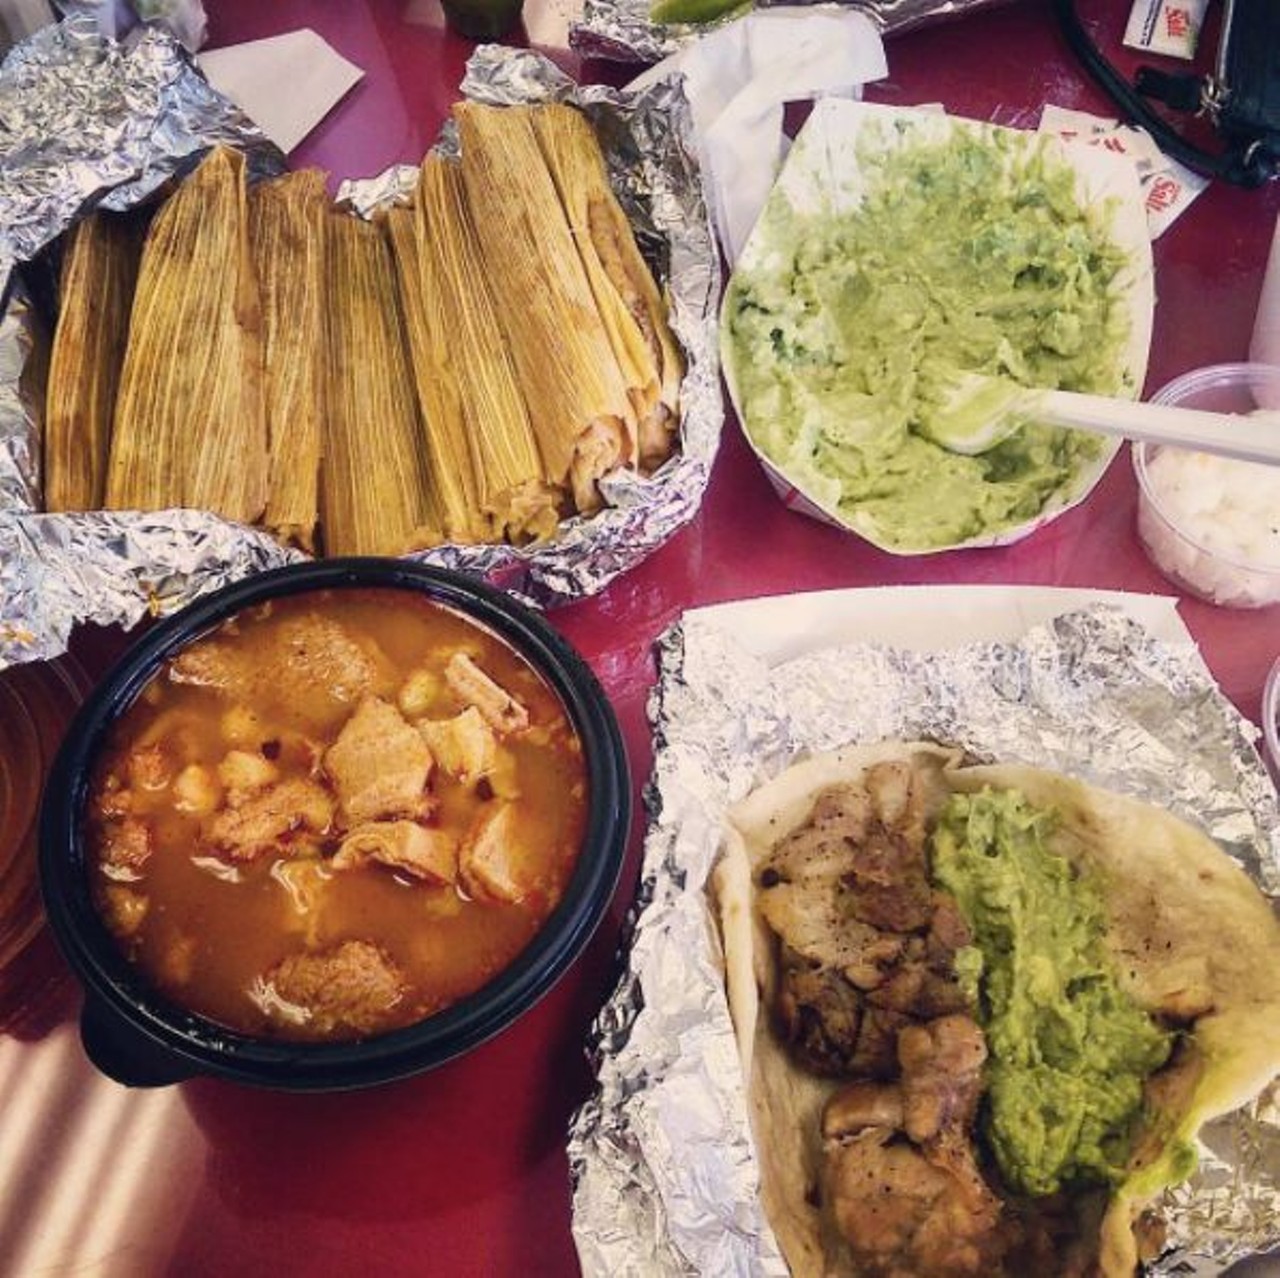 Best Tamales and Best Barbacoa
Tellez Tamales & Barbacoa, multiple locations, (210) 433-1367
Photo via Instagram, rg_coupe